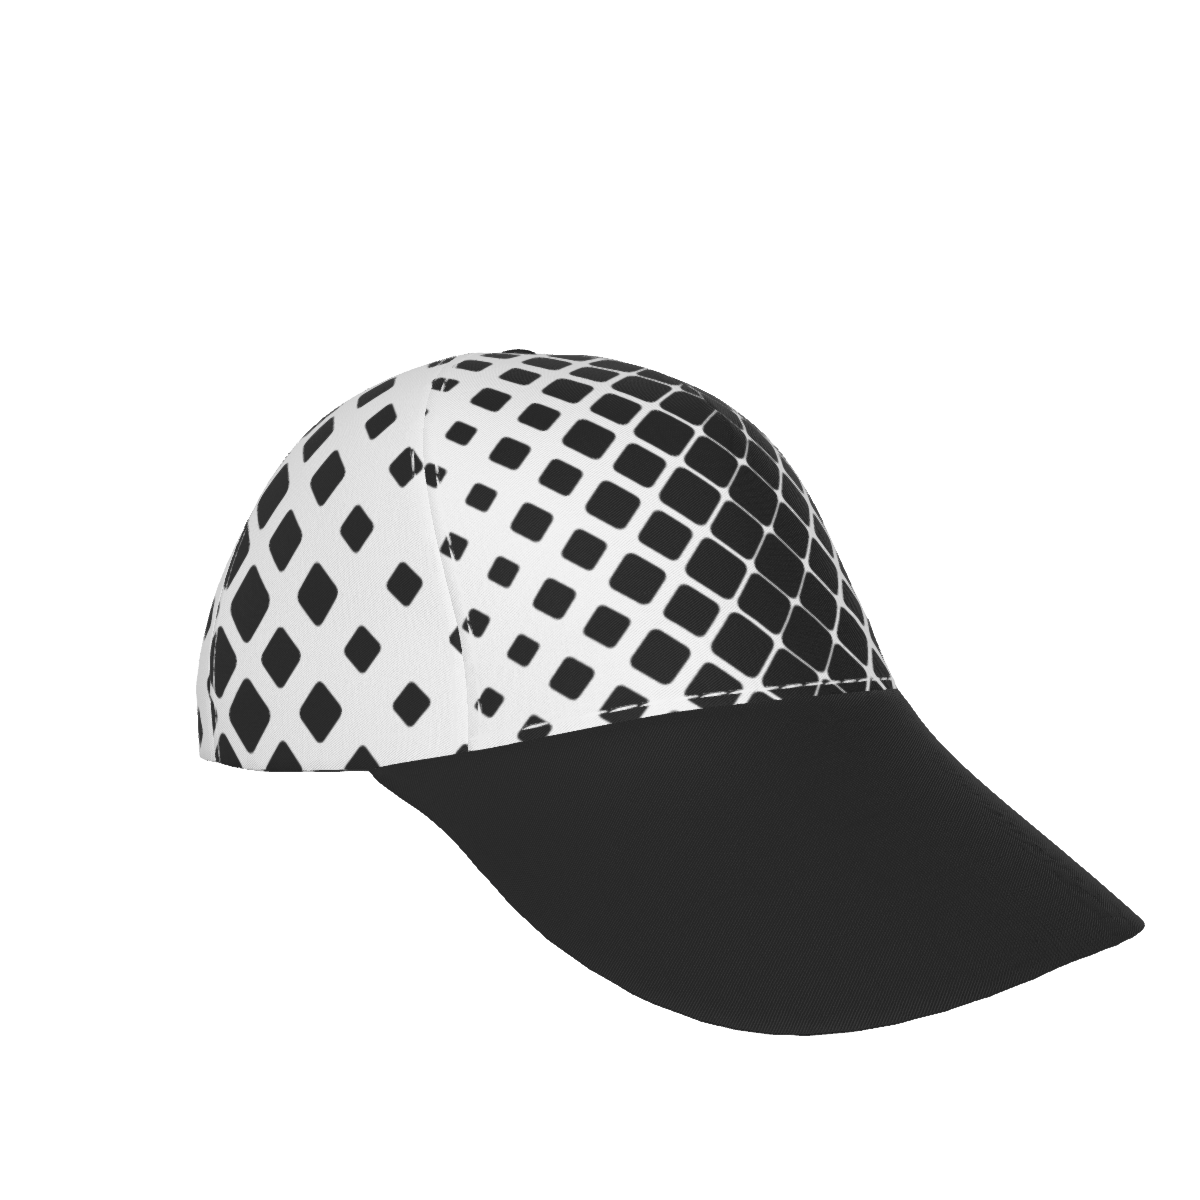 Black And White 90 with Black Peaked Cap - DromedarShop.com Online Boutique